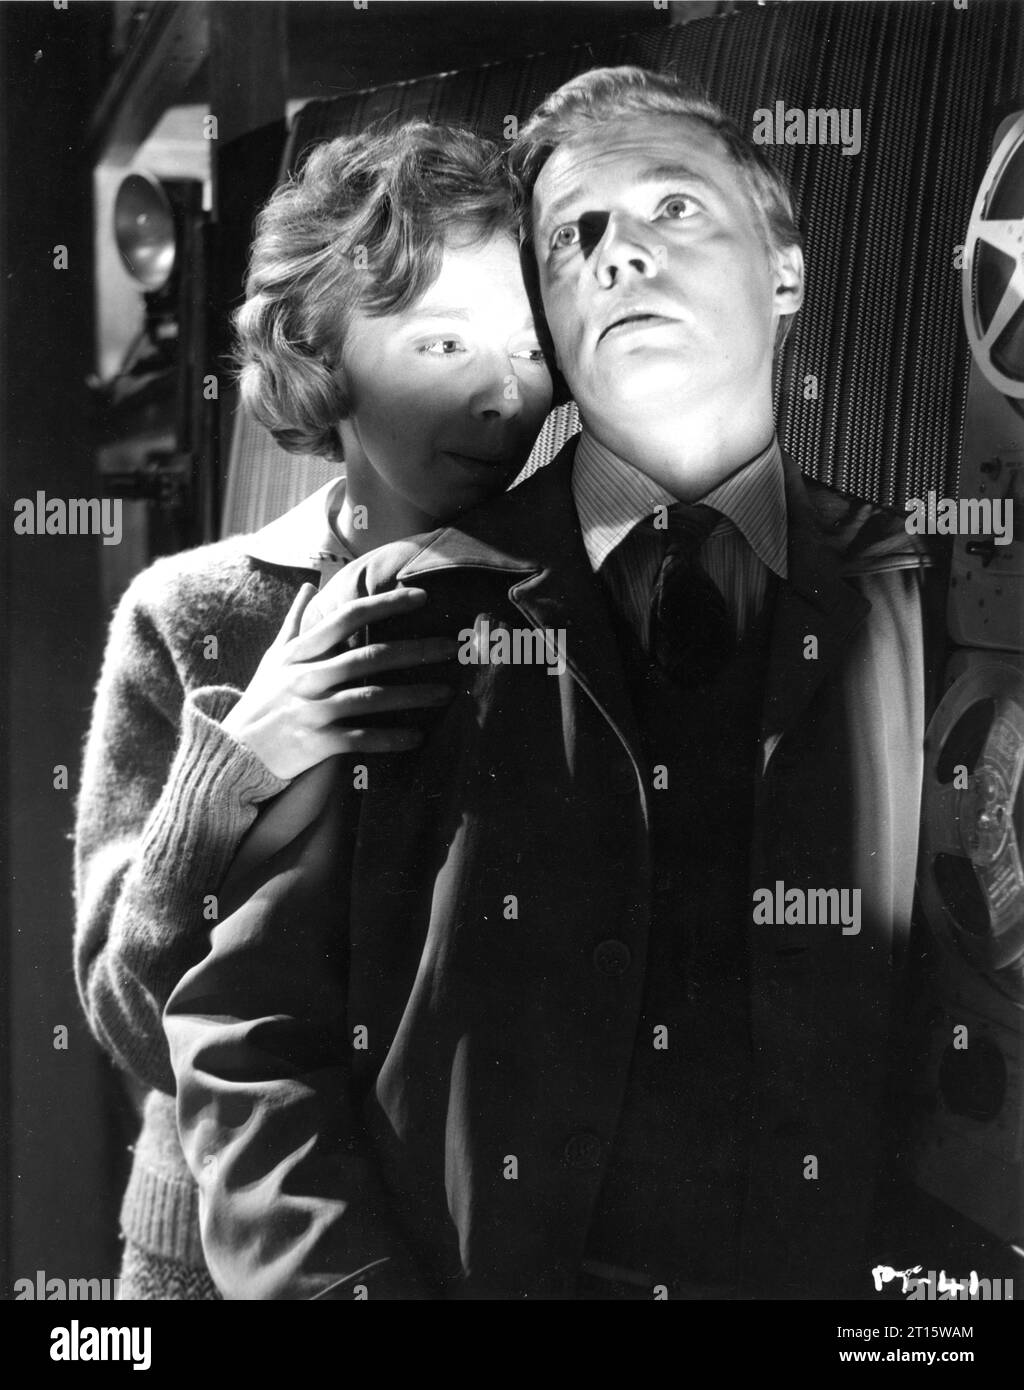 ANNA MASSEY and CARL BOEHM in a scene from PEEPING TOM 1960 Director MICHAEL POWELL Story LEO MARKS Cinematographer OTTO HELLER Anglo Amalgamated Film Distributors Stock Photo